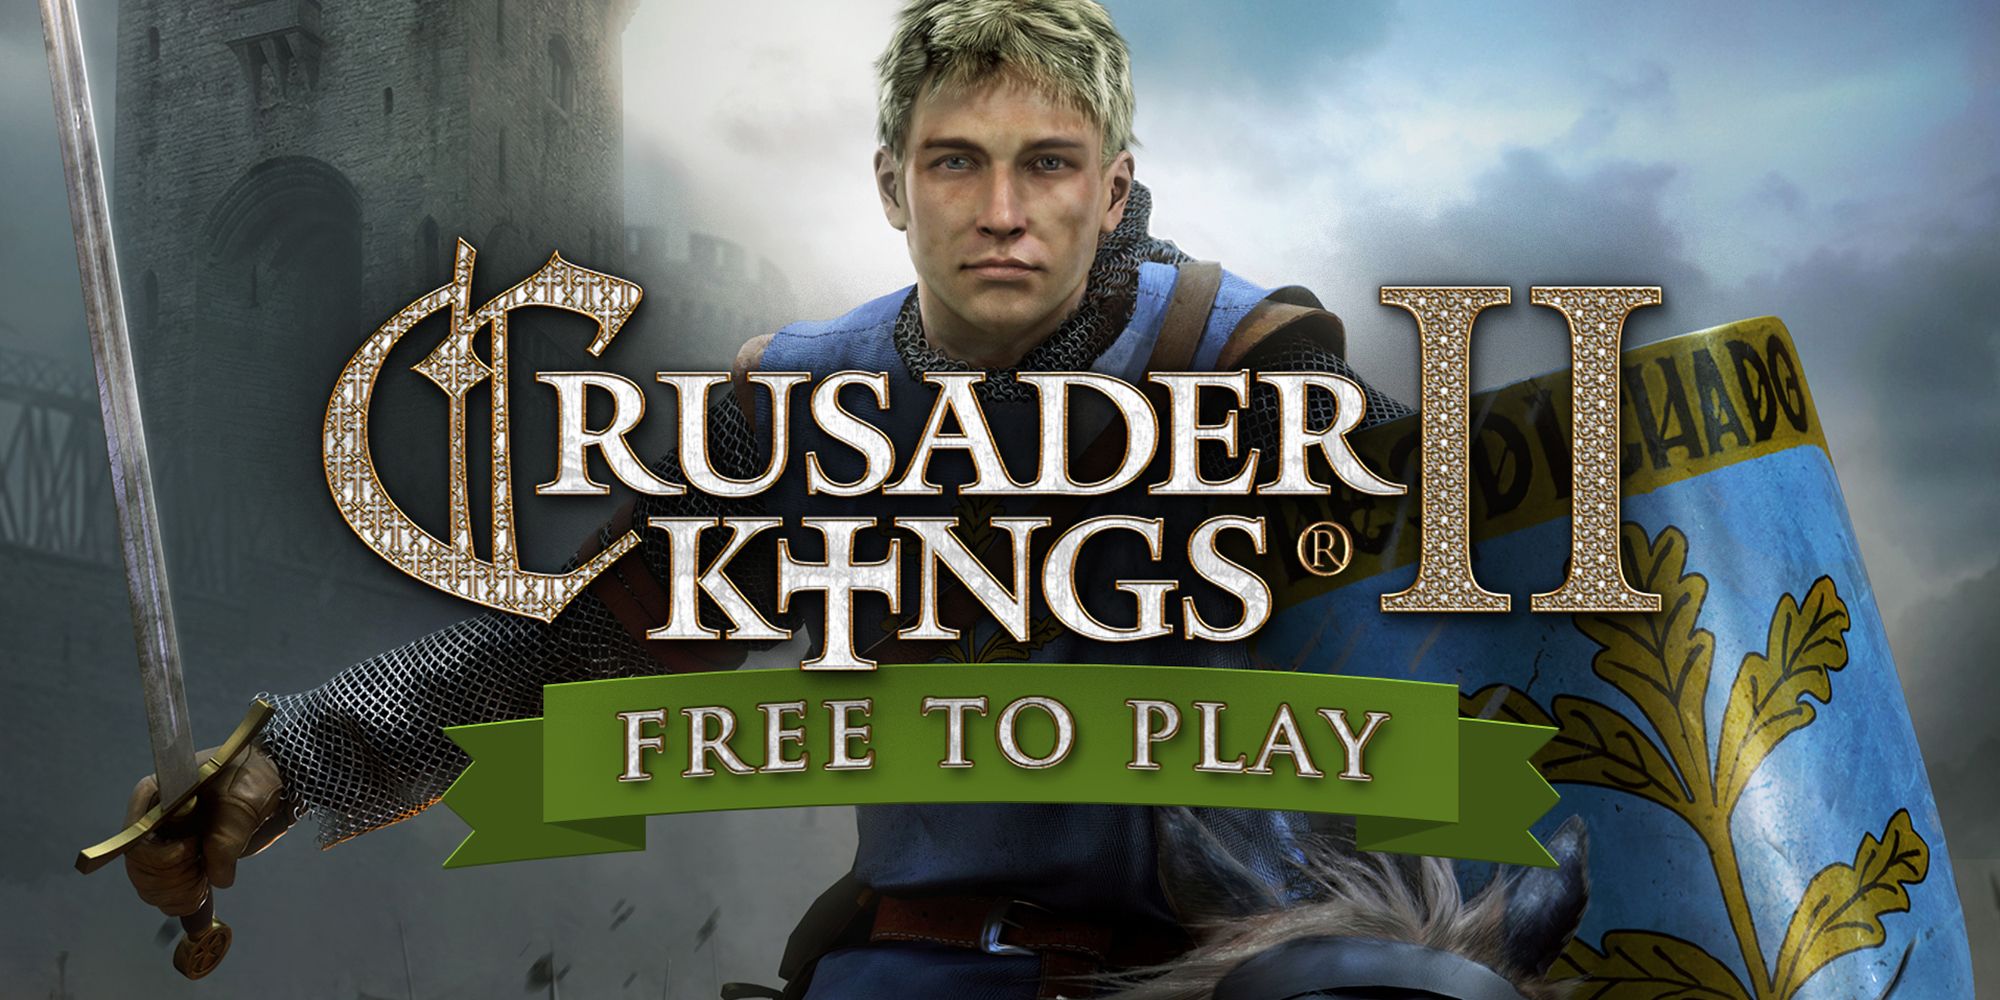 Crusaders Kings 2 Title Art With Soldier